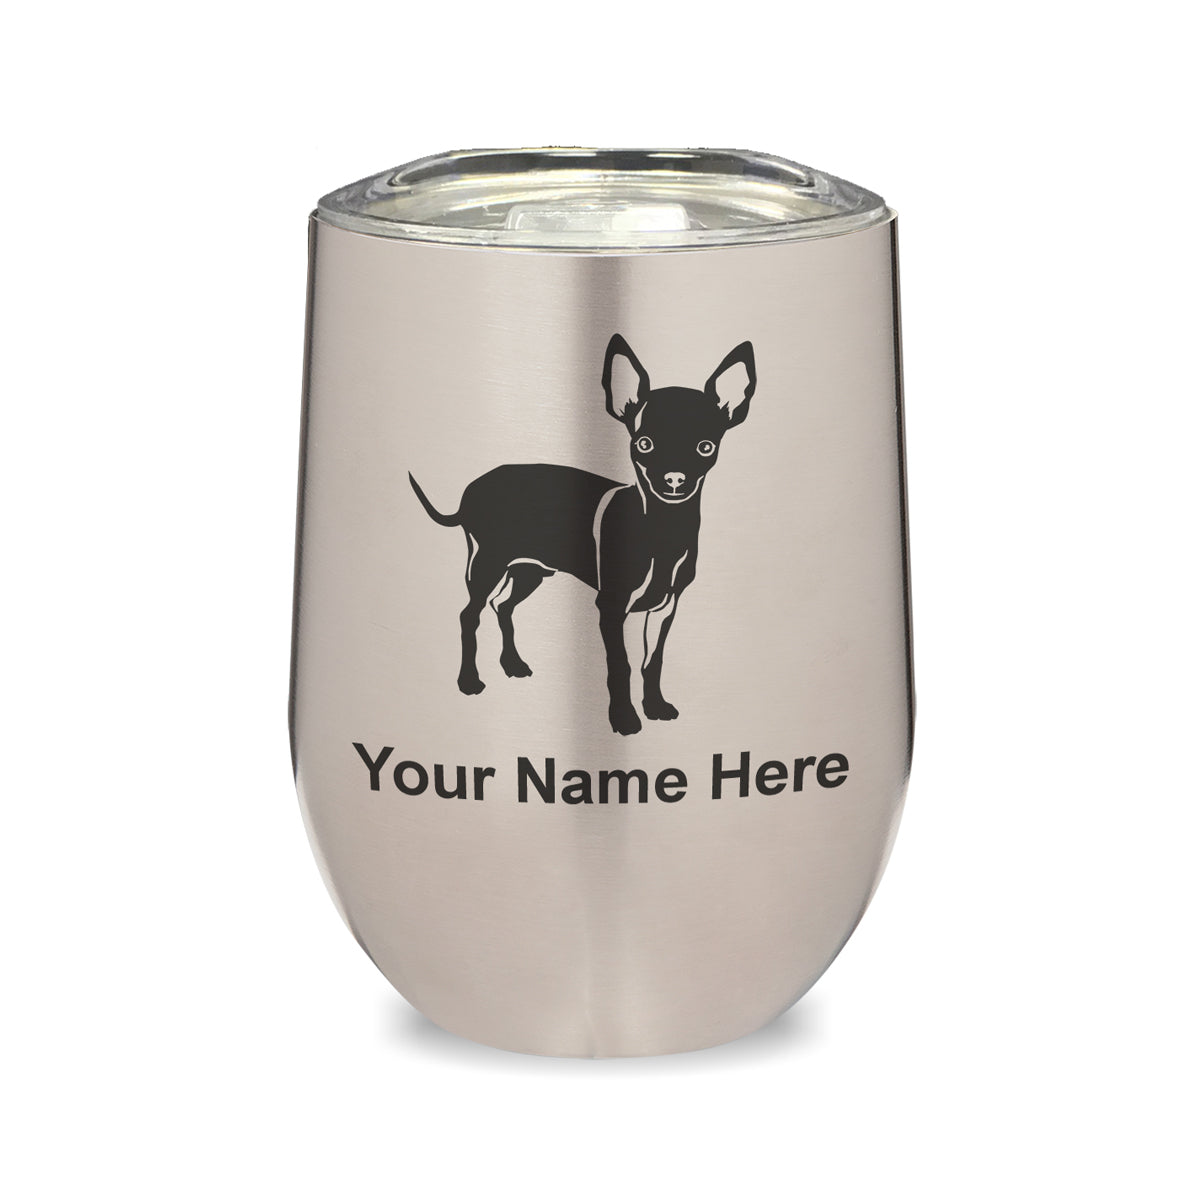 LaserGram Double Wall Stainless Steel Wine Glass, Chihuahua Dog, Personalized Engraving Included